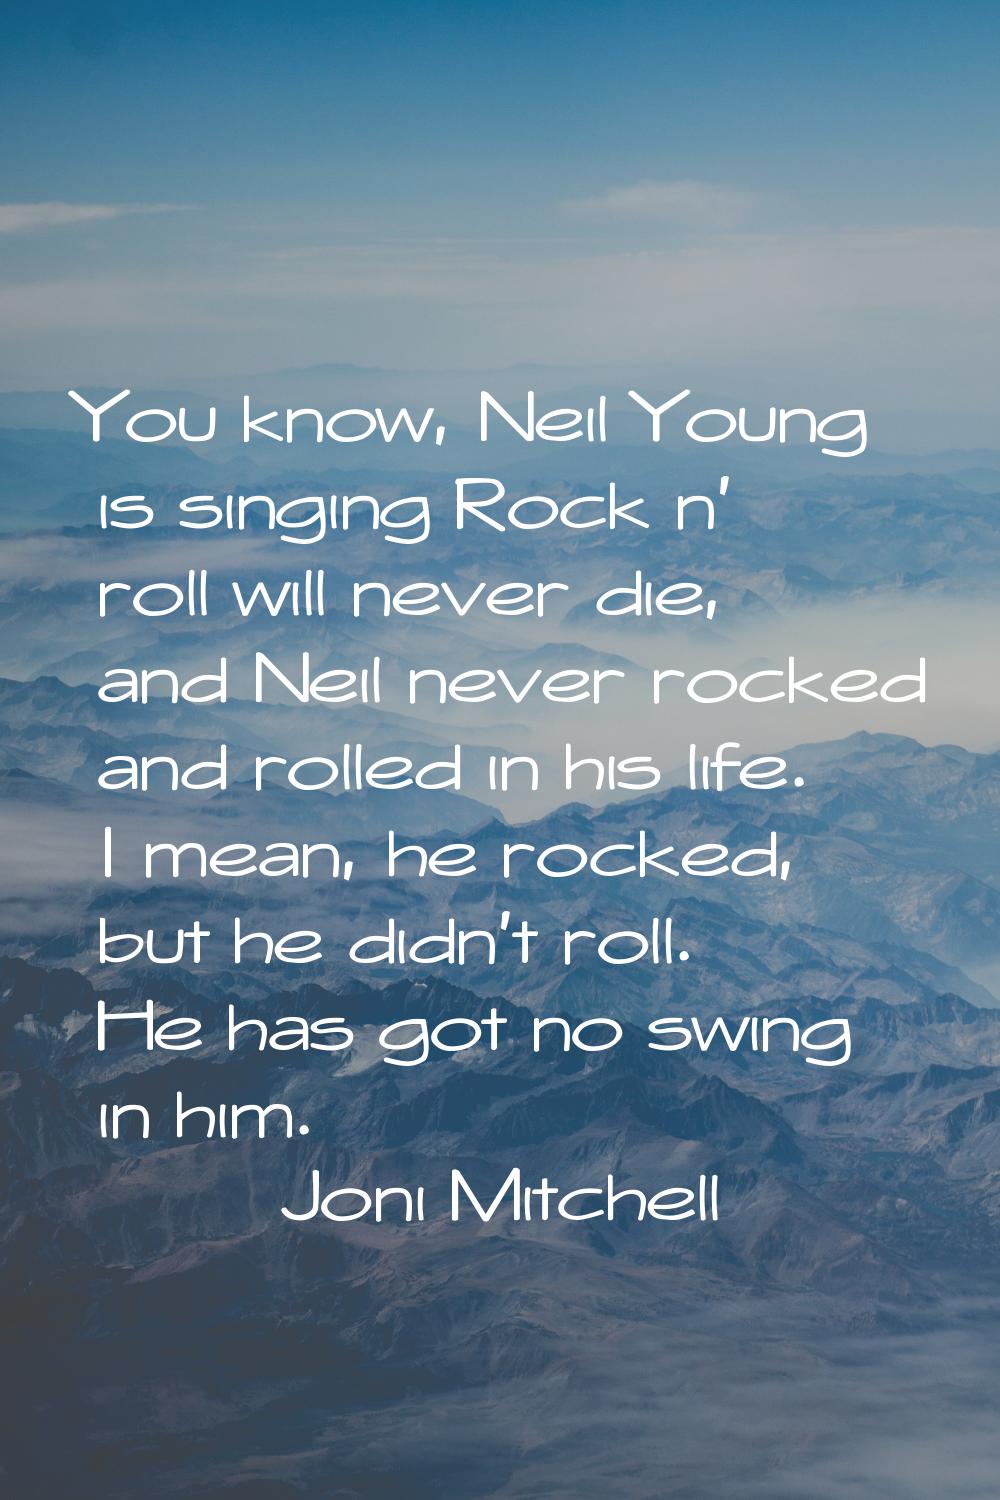 You know, Neil Young is singing Rock n' roll will never die, and Neil never rocked and rolled in hi